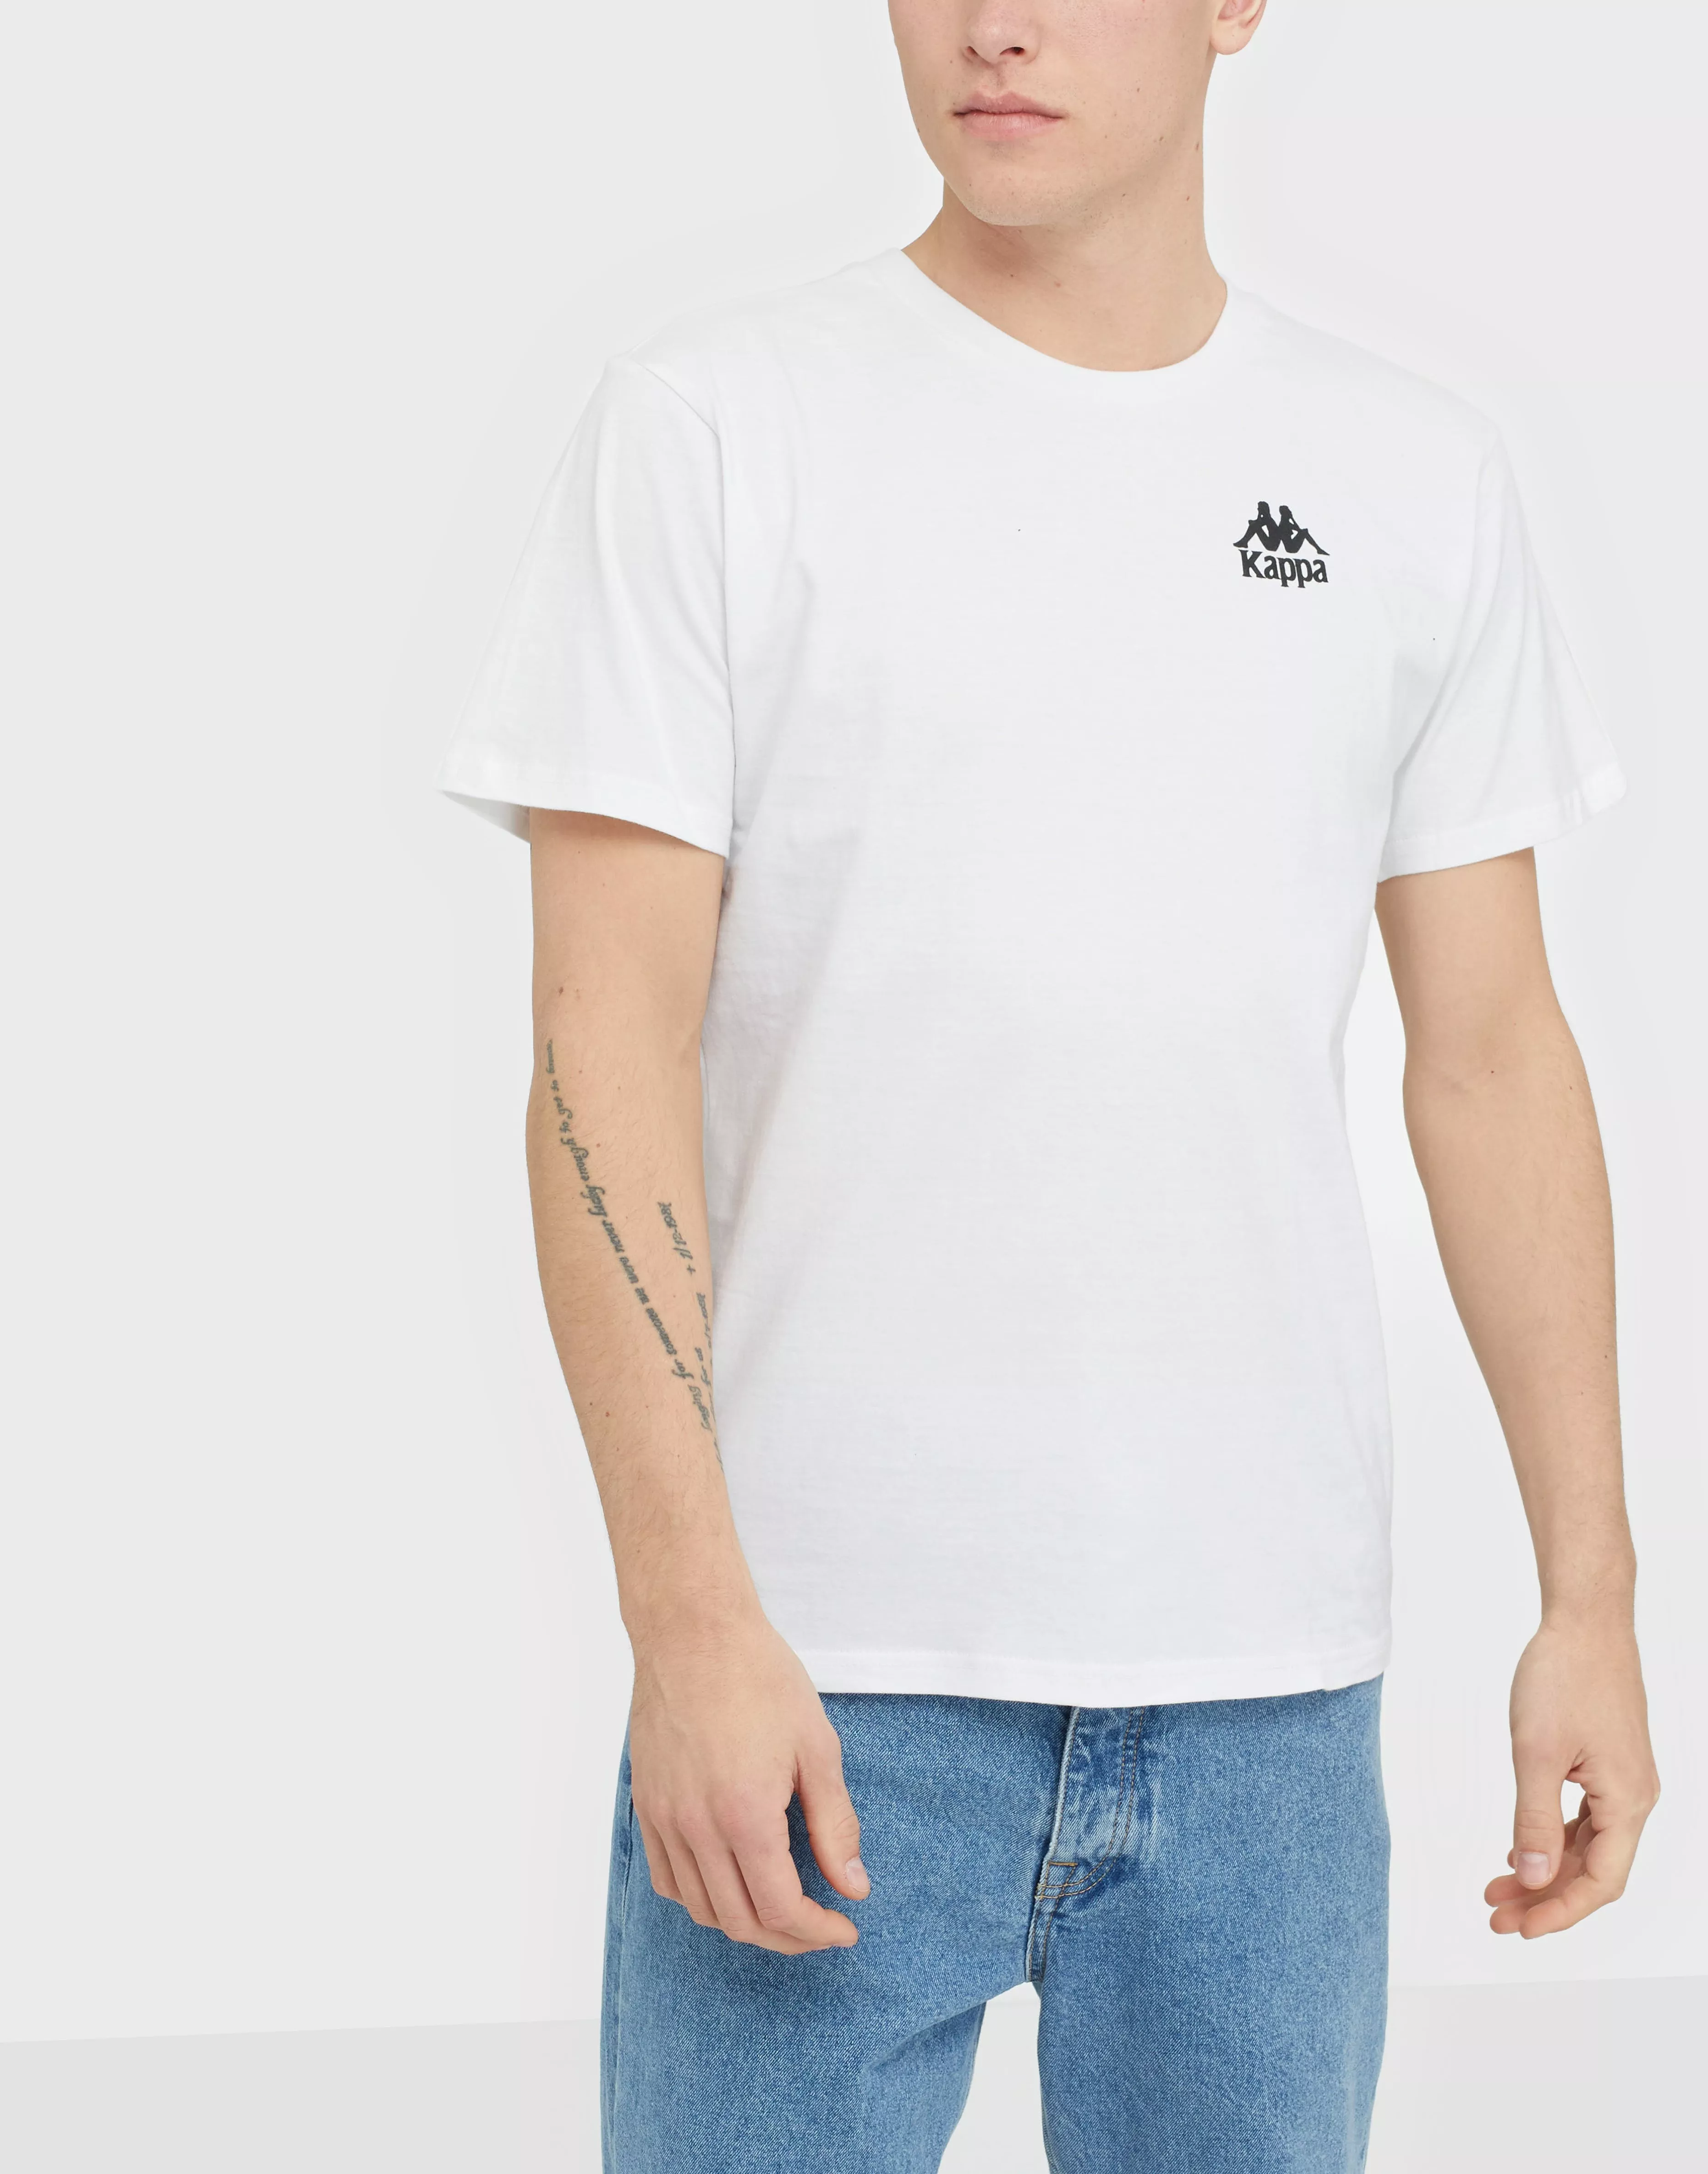 KAPPA T-Shirt S/S Auth Wollie Hvid/Sort | NLY Man